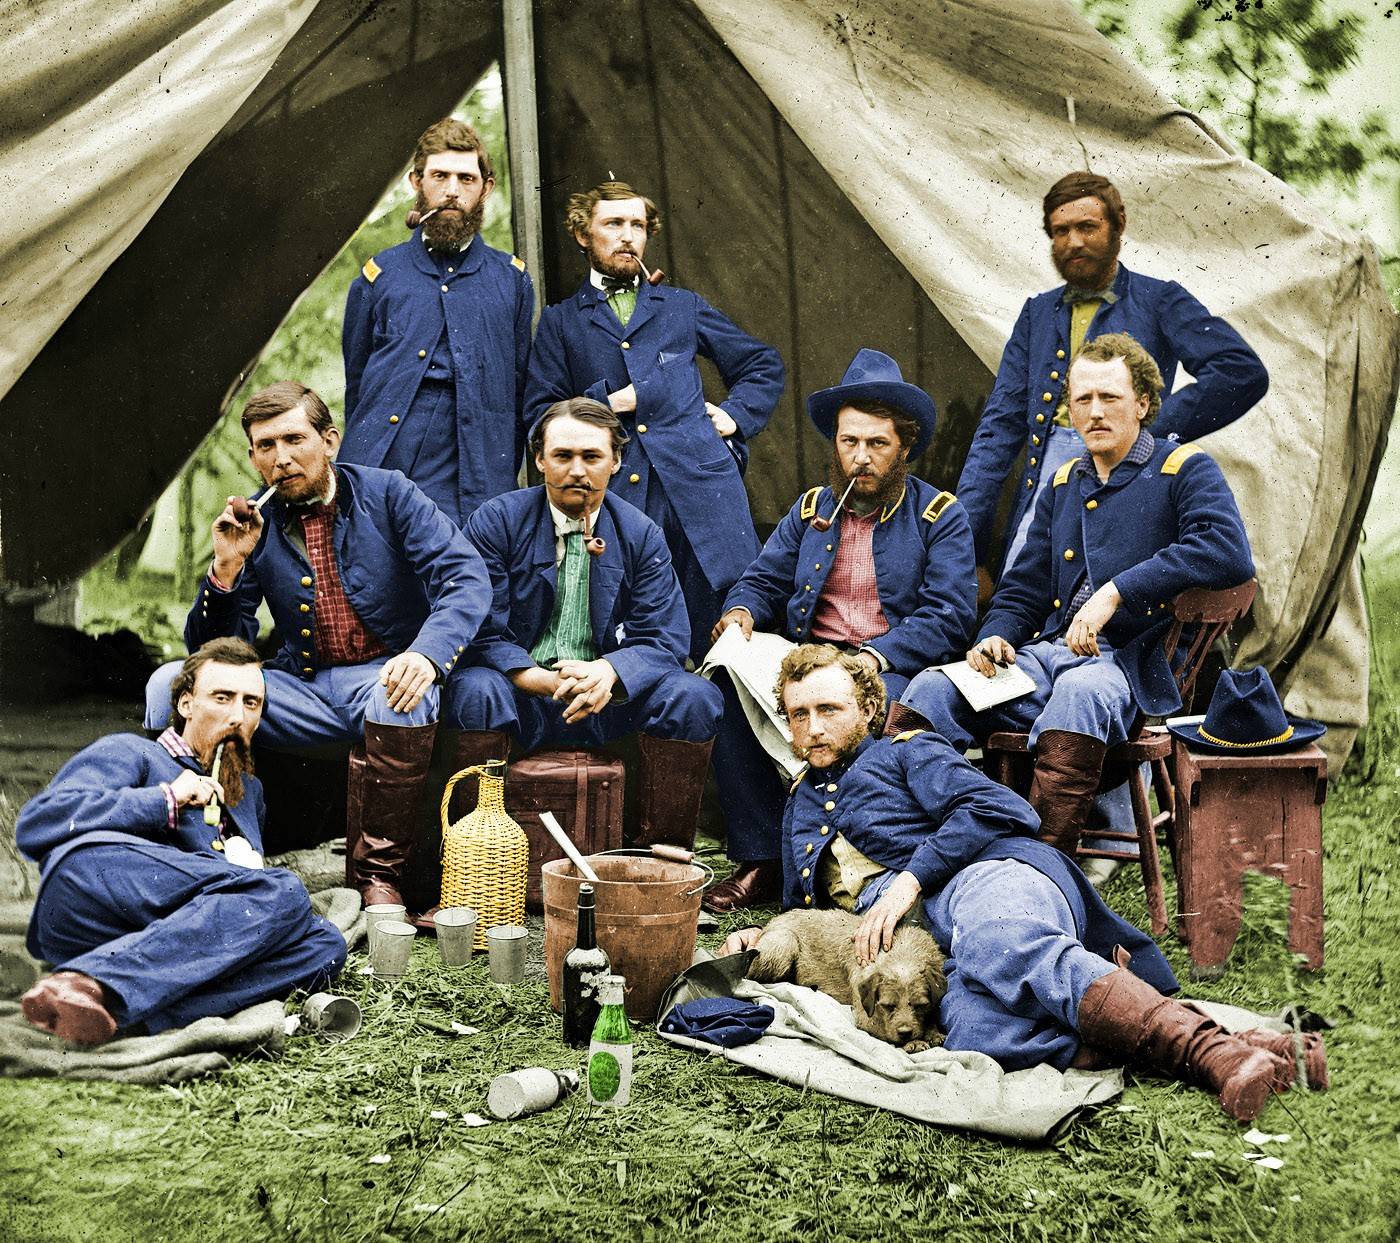 Lt. Custer is pictured in color having a bachelors’ picnic with Union troops, 1862.